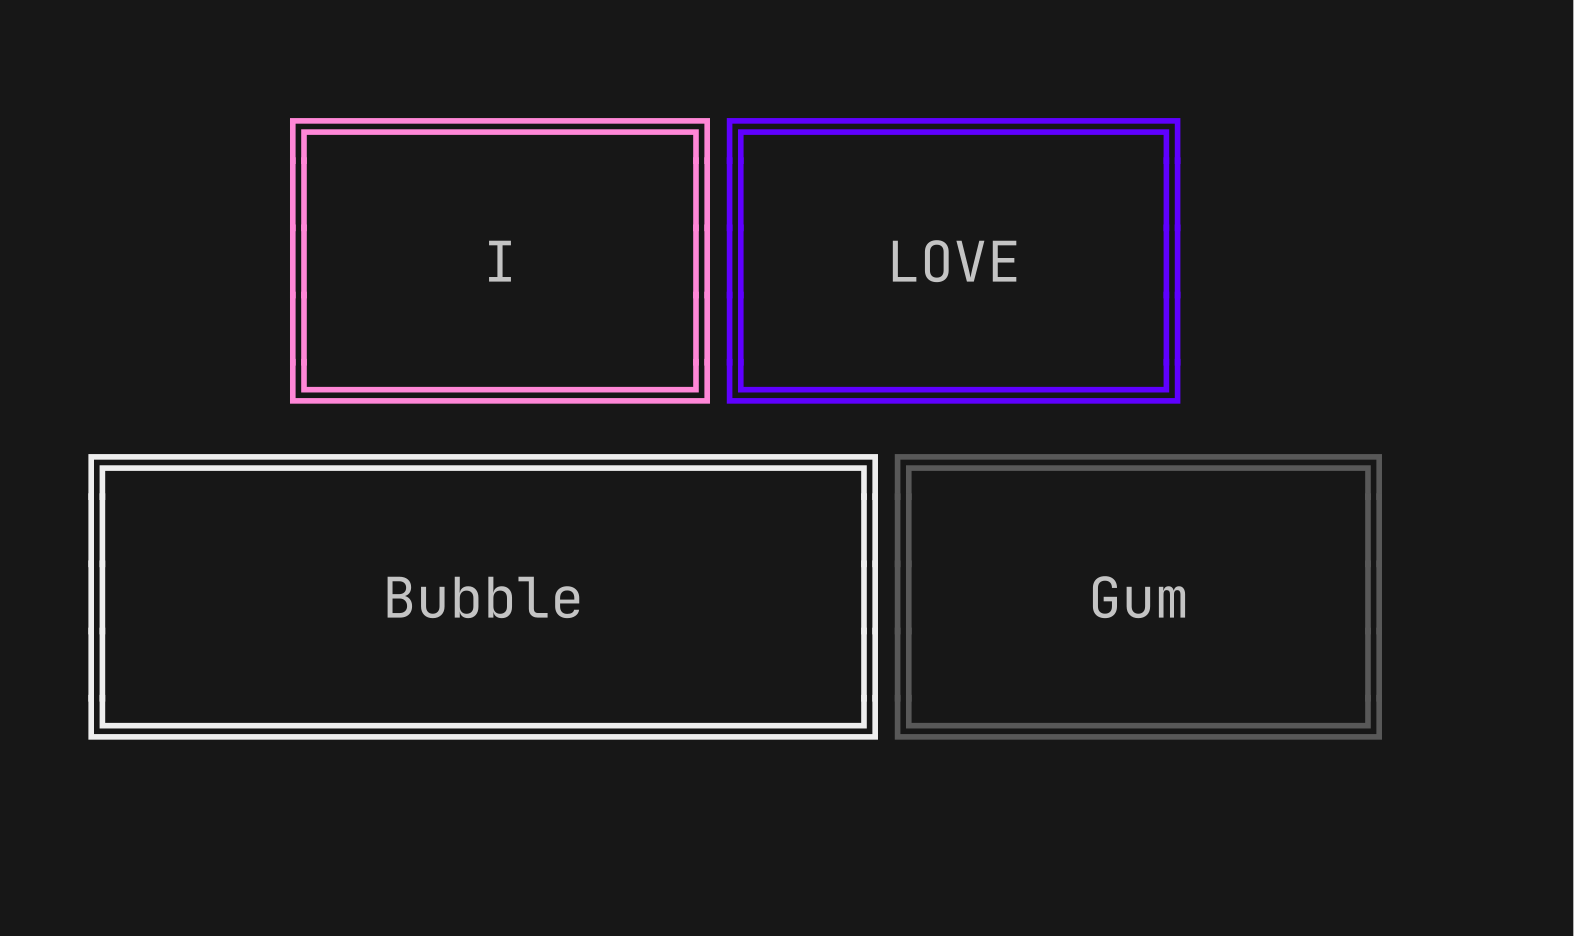 I LOVE Bubble Gum written out in four boxes with double borders around them.